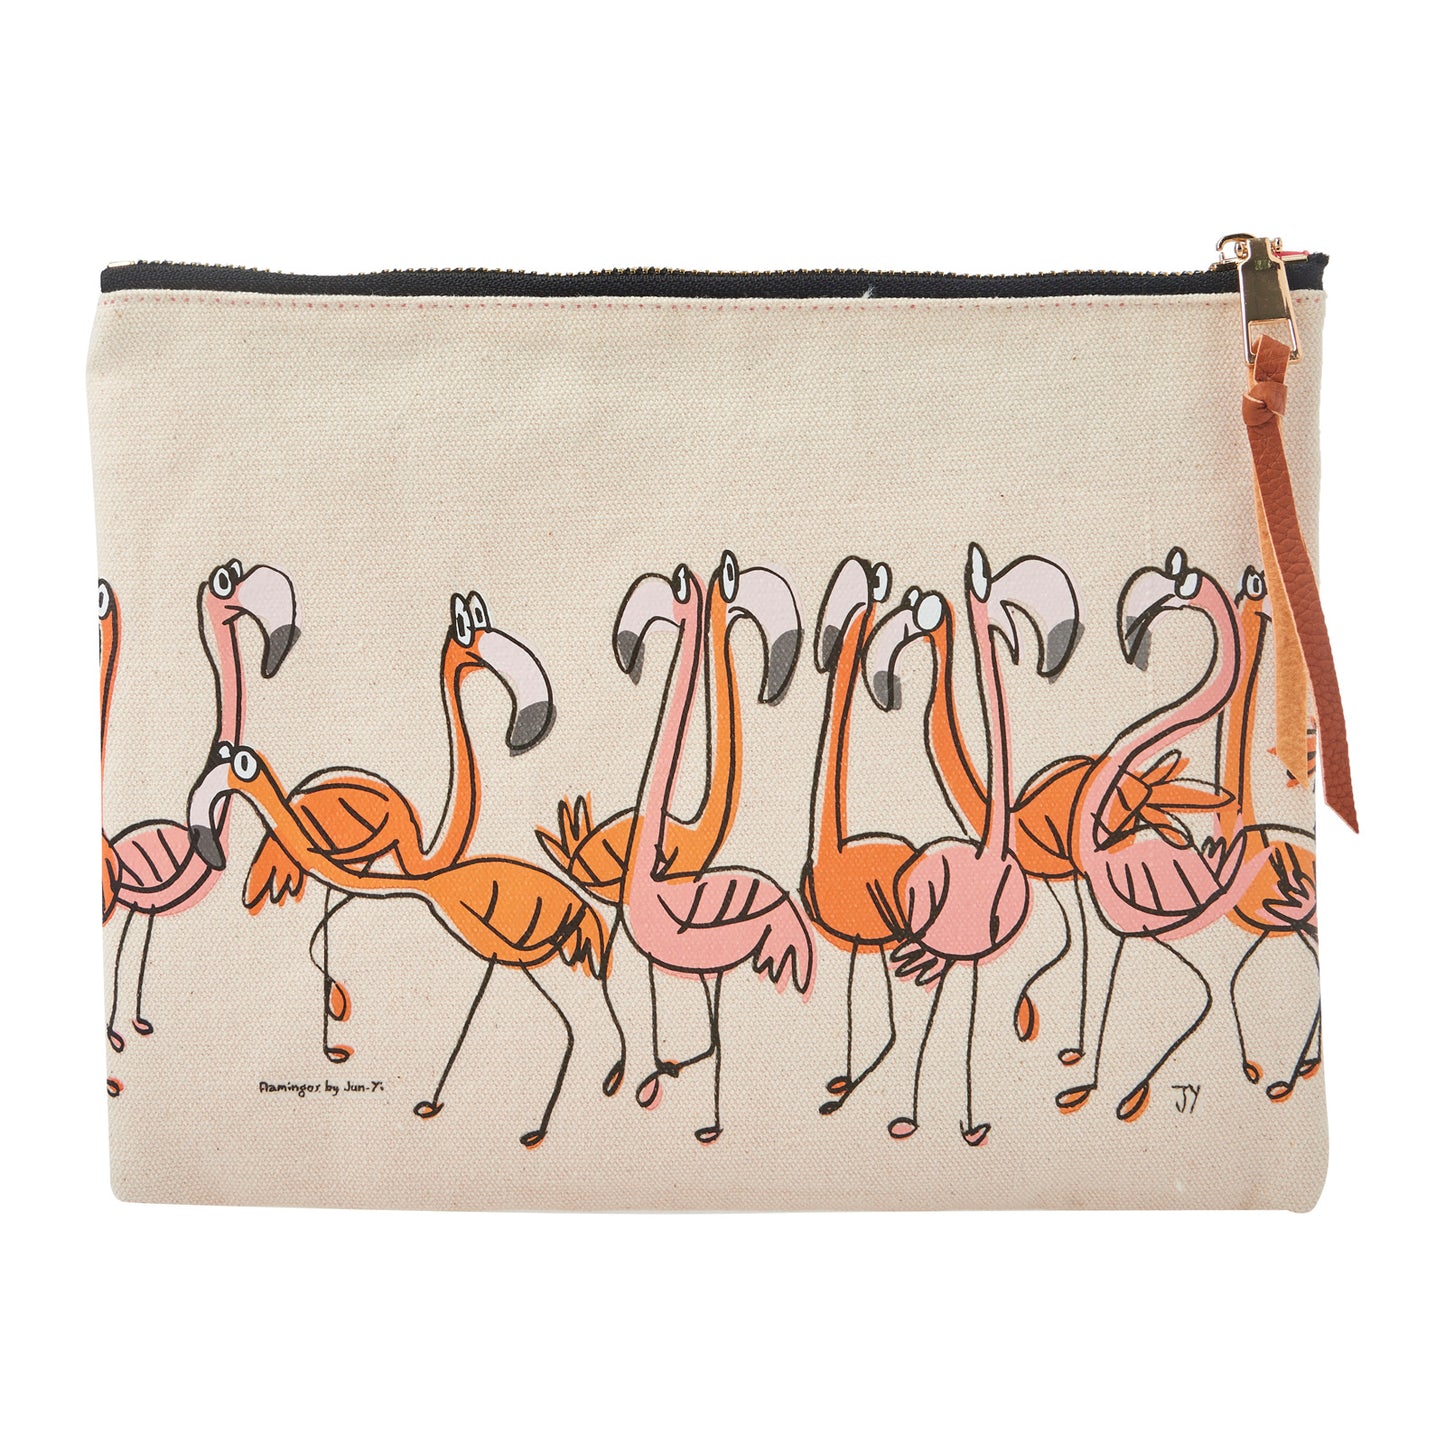 Pouch - Flamingo Design | The Animal Project